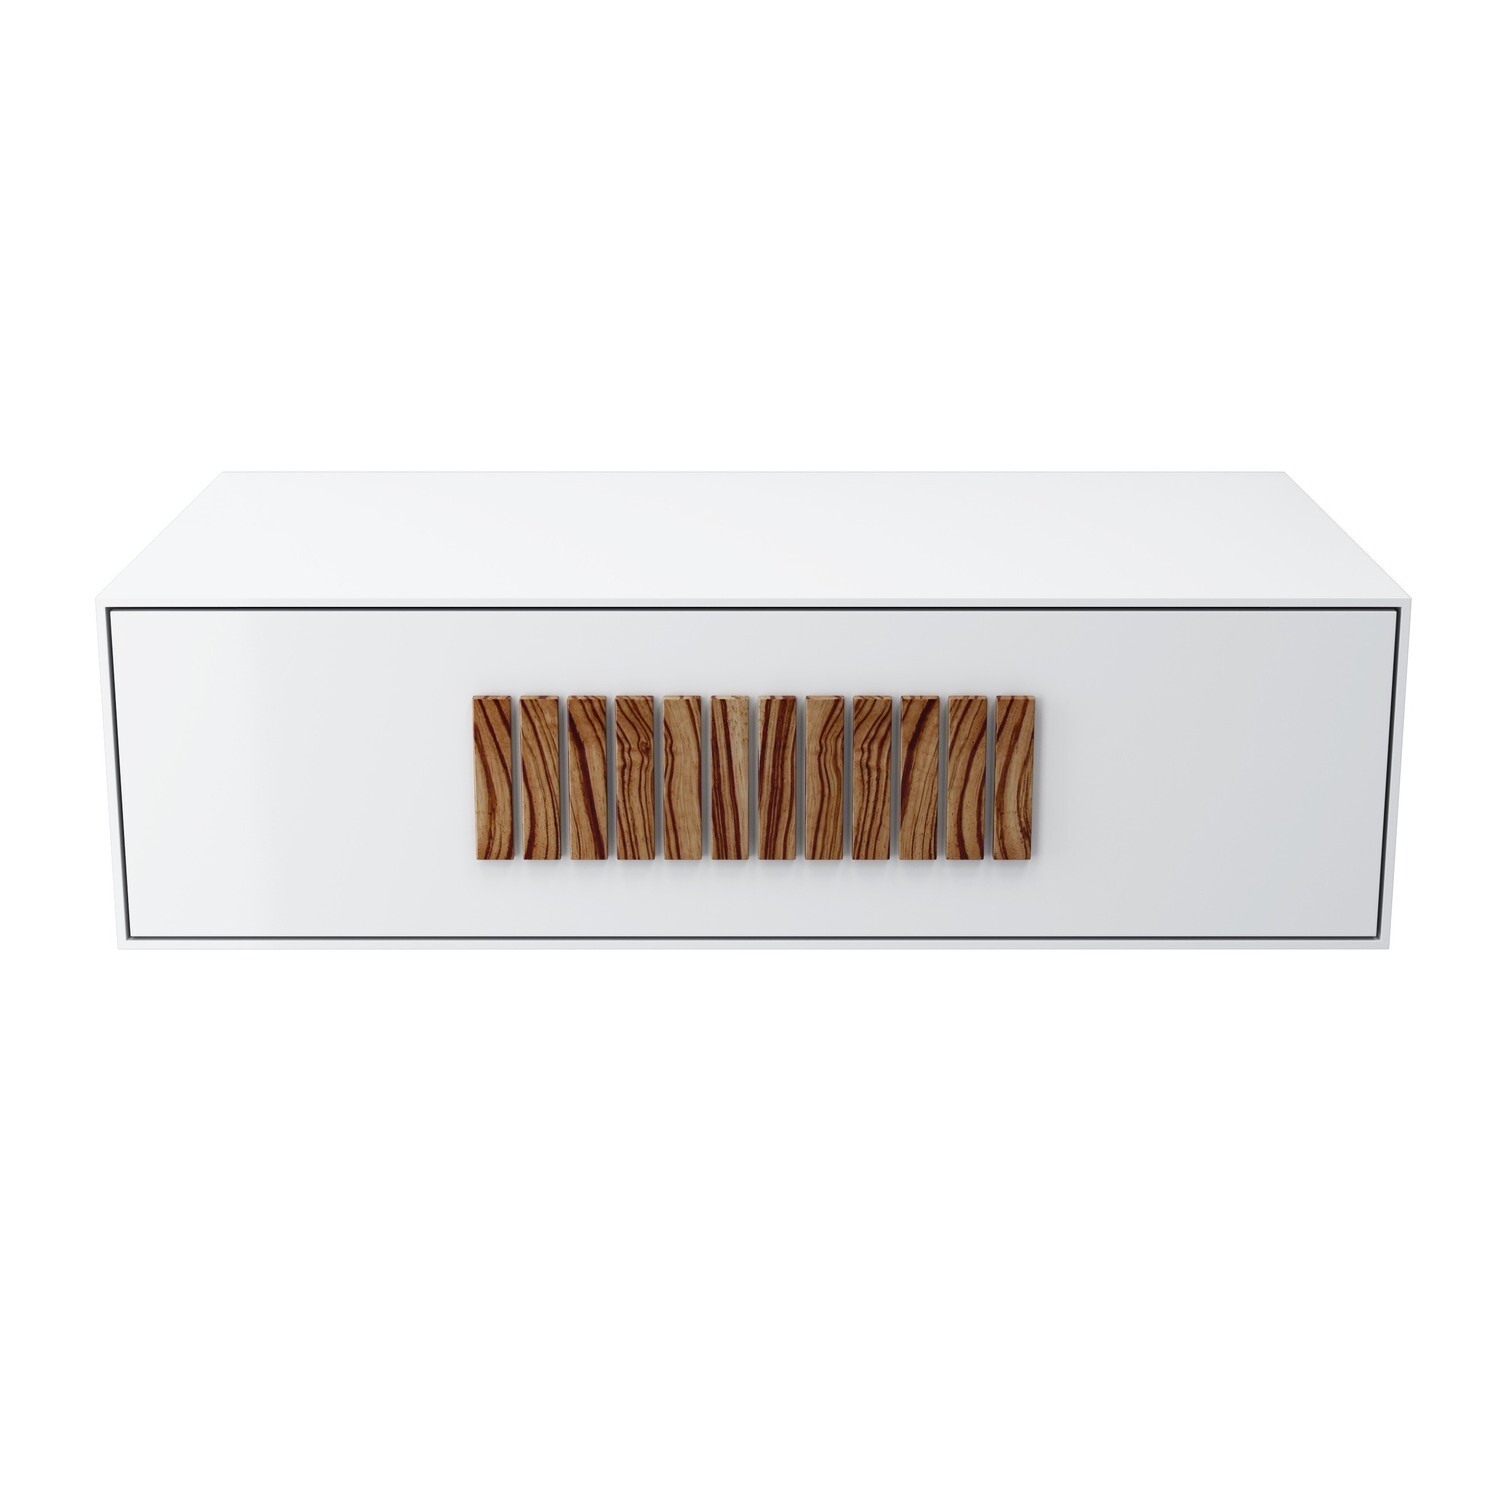 Vanity unit in corian and zebrawood